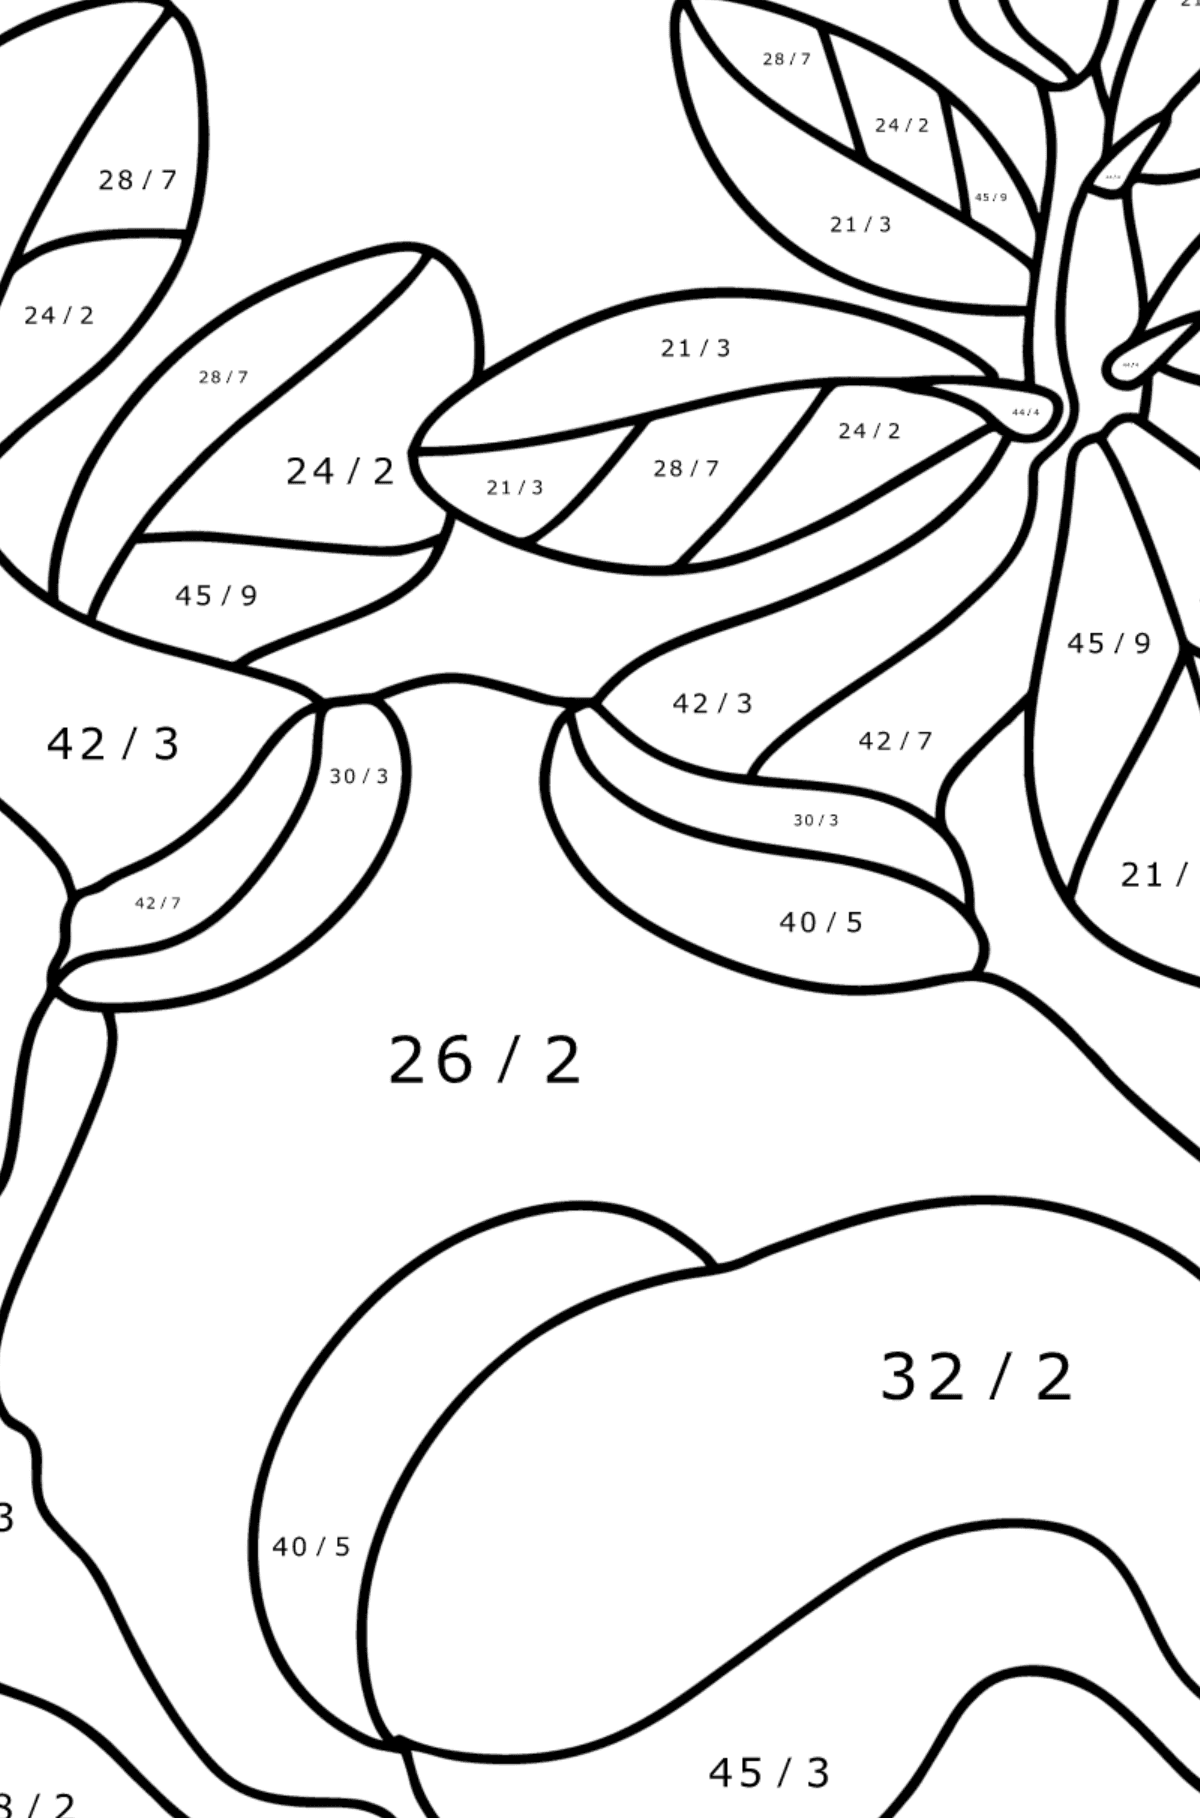 Adenium coloring page - Math Coloring - Division for Kids